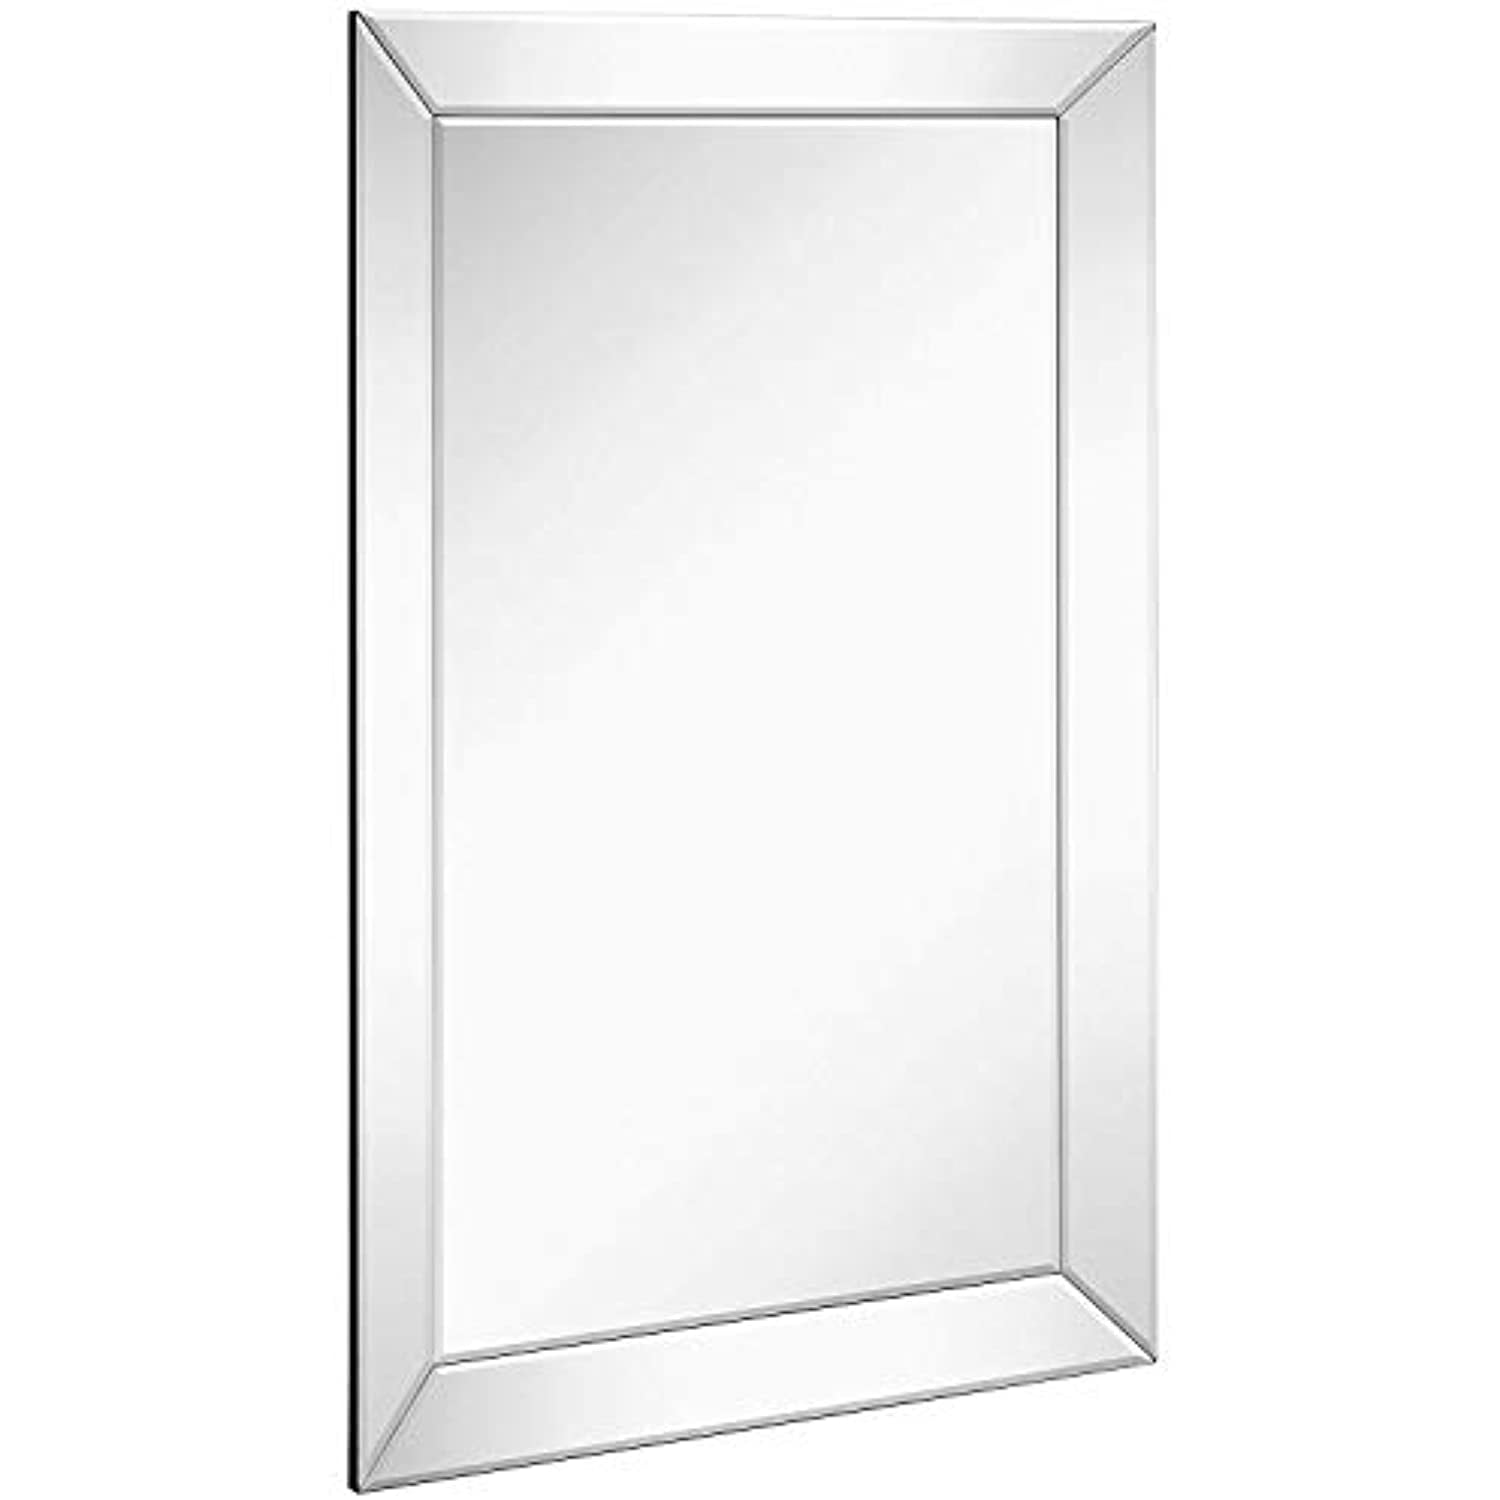 Hallway or Entry Bathroom Modern & Classy Accent Decor for Vanity 24x36 Wall Rectangular Mirror with 3 inch Beveled Edge Hamilton Hills Large Silver Mirror with Angled Beveled Frame